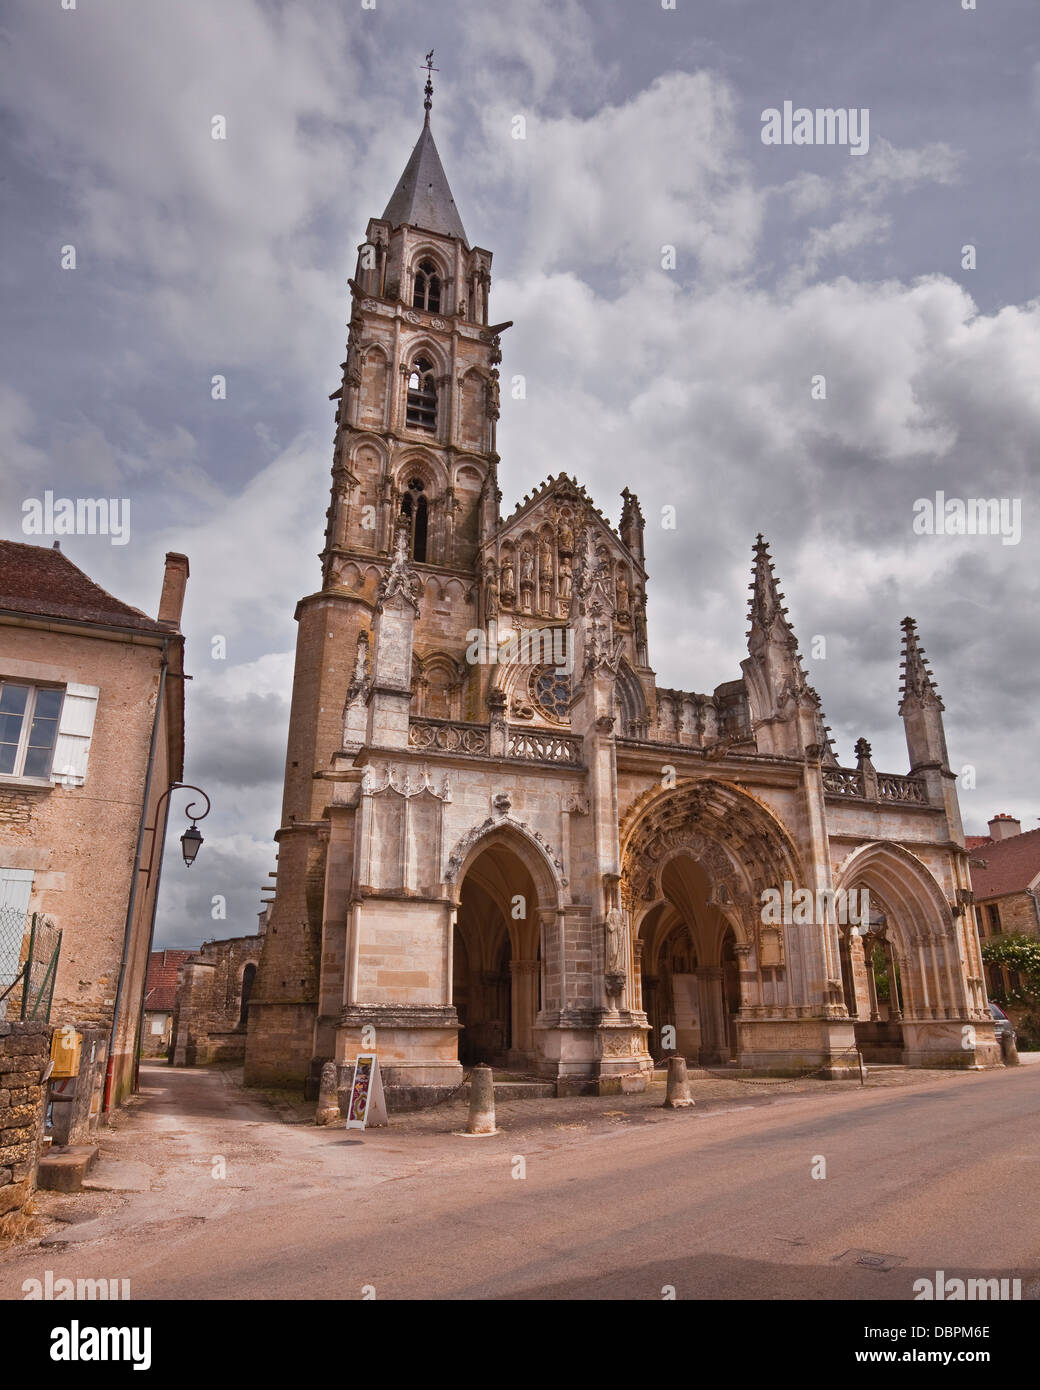 The beautiful gothic architecture of the church of Notre Dame, Saint Pere, Yonne, Burgundy, France, Europe Stock Photo